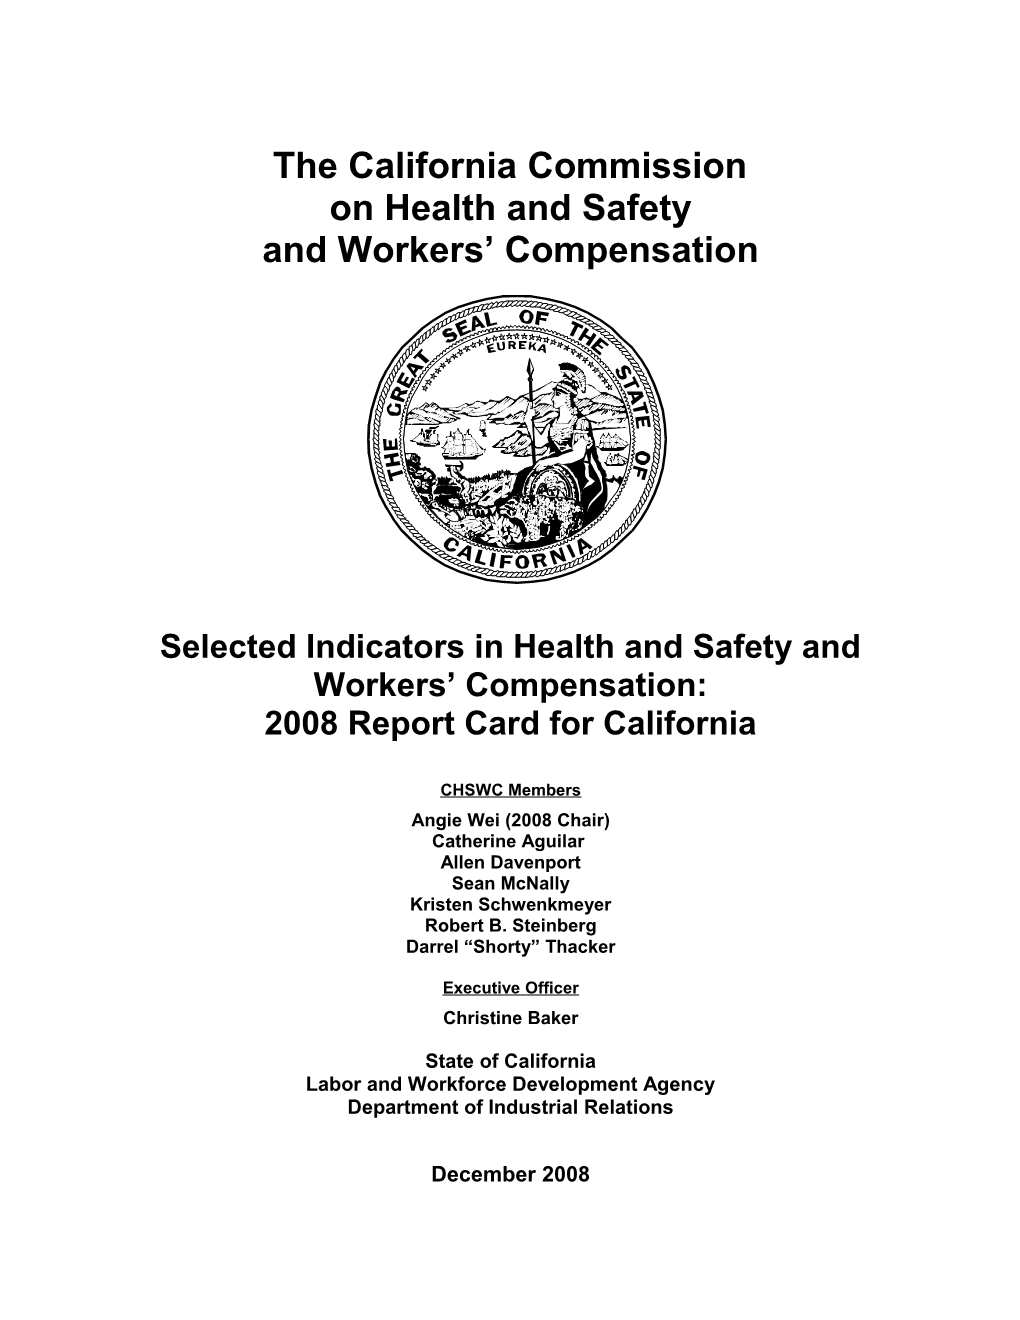 Selected Indicators in Workers Compensation: 2008 Report Card for California